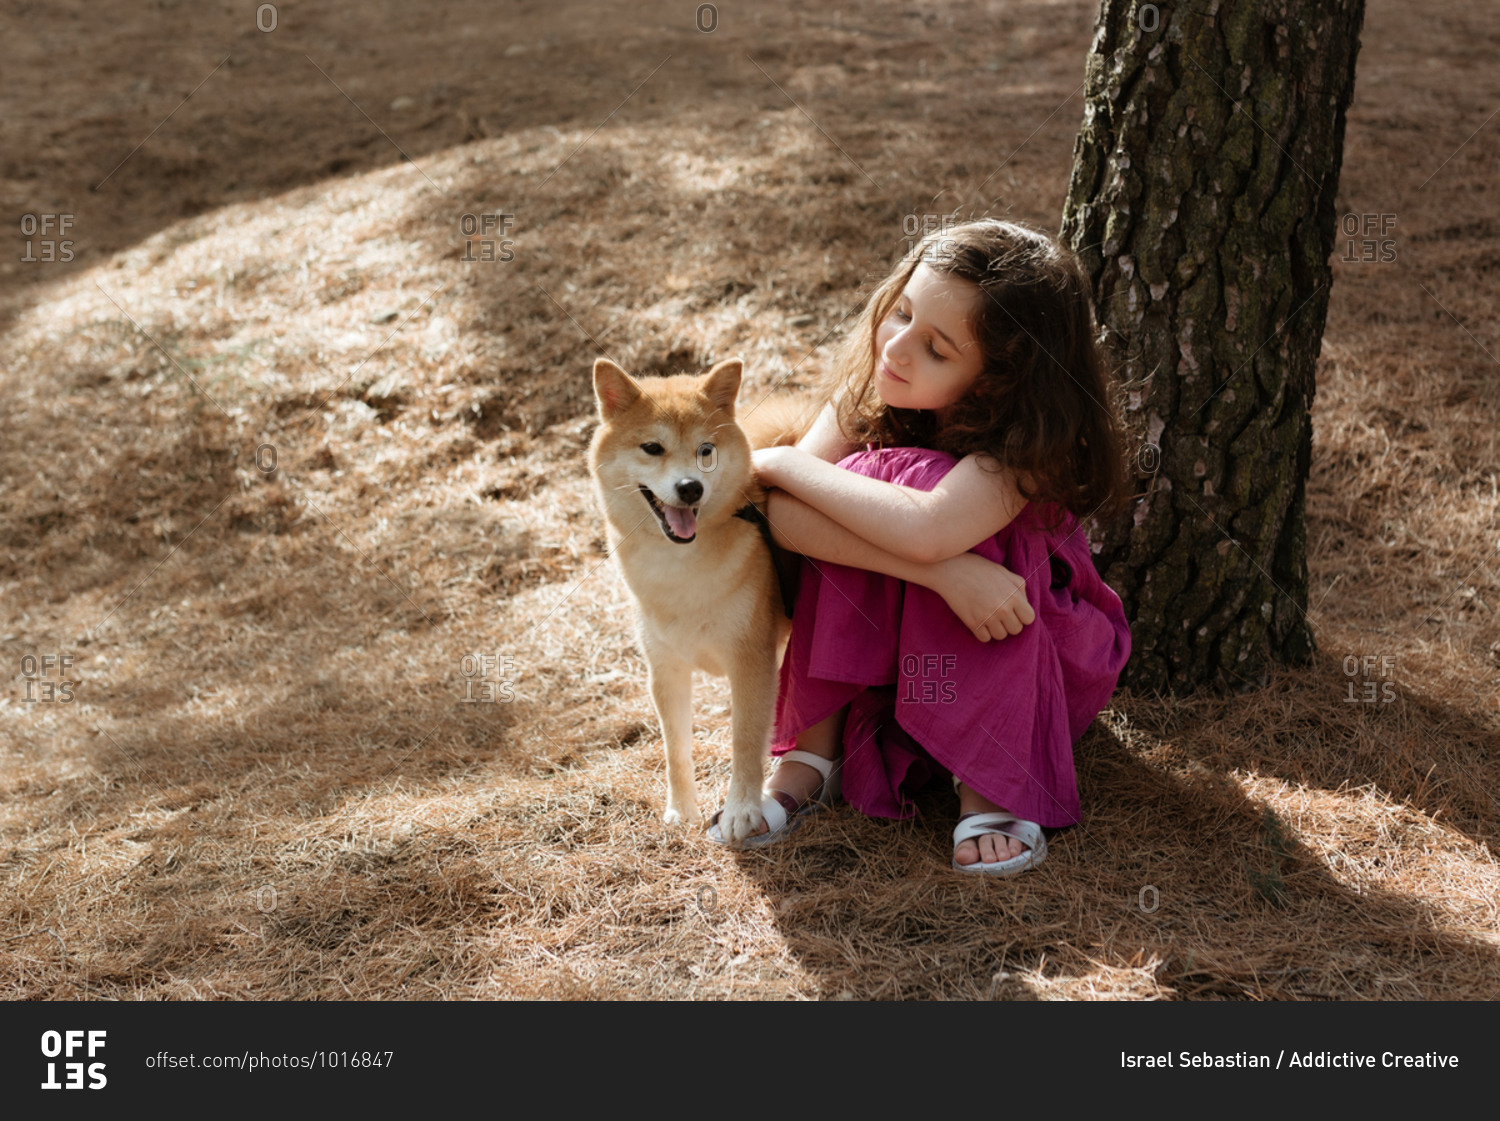 From above full length of positive tranquil little girl embracing adorable Shiba Inu dog while sitting together near tree trunk in summer forest